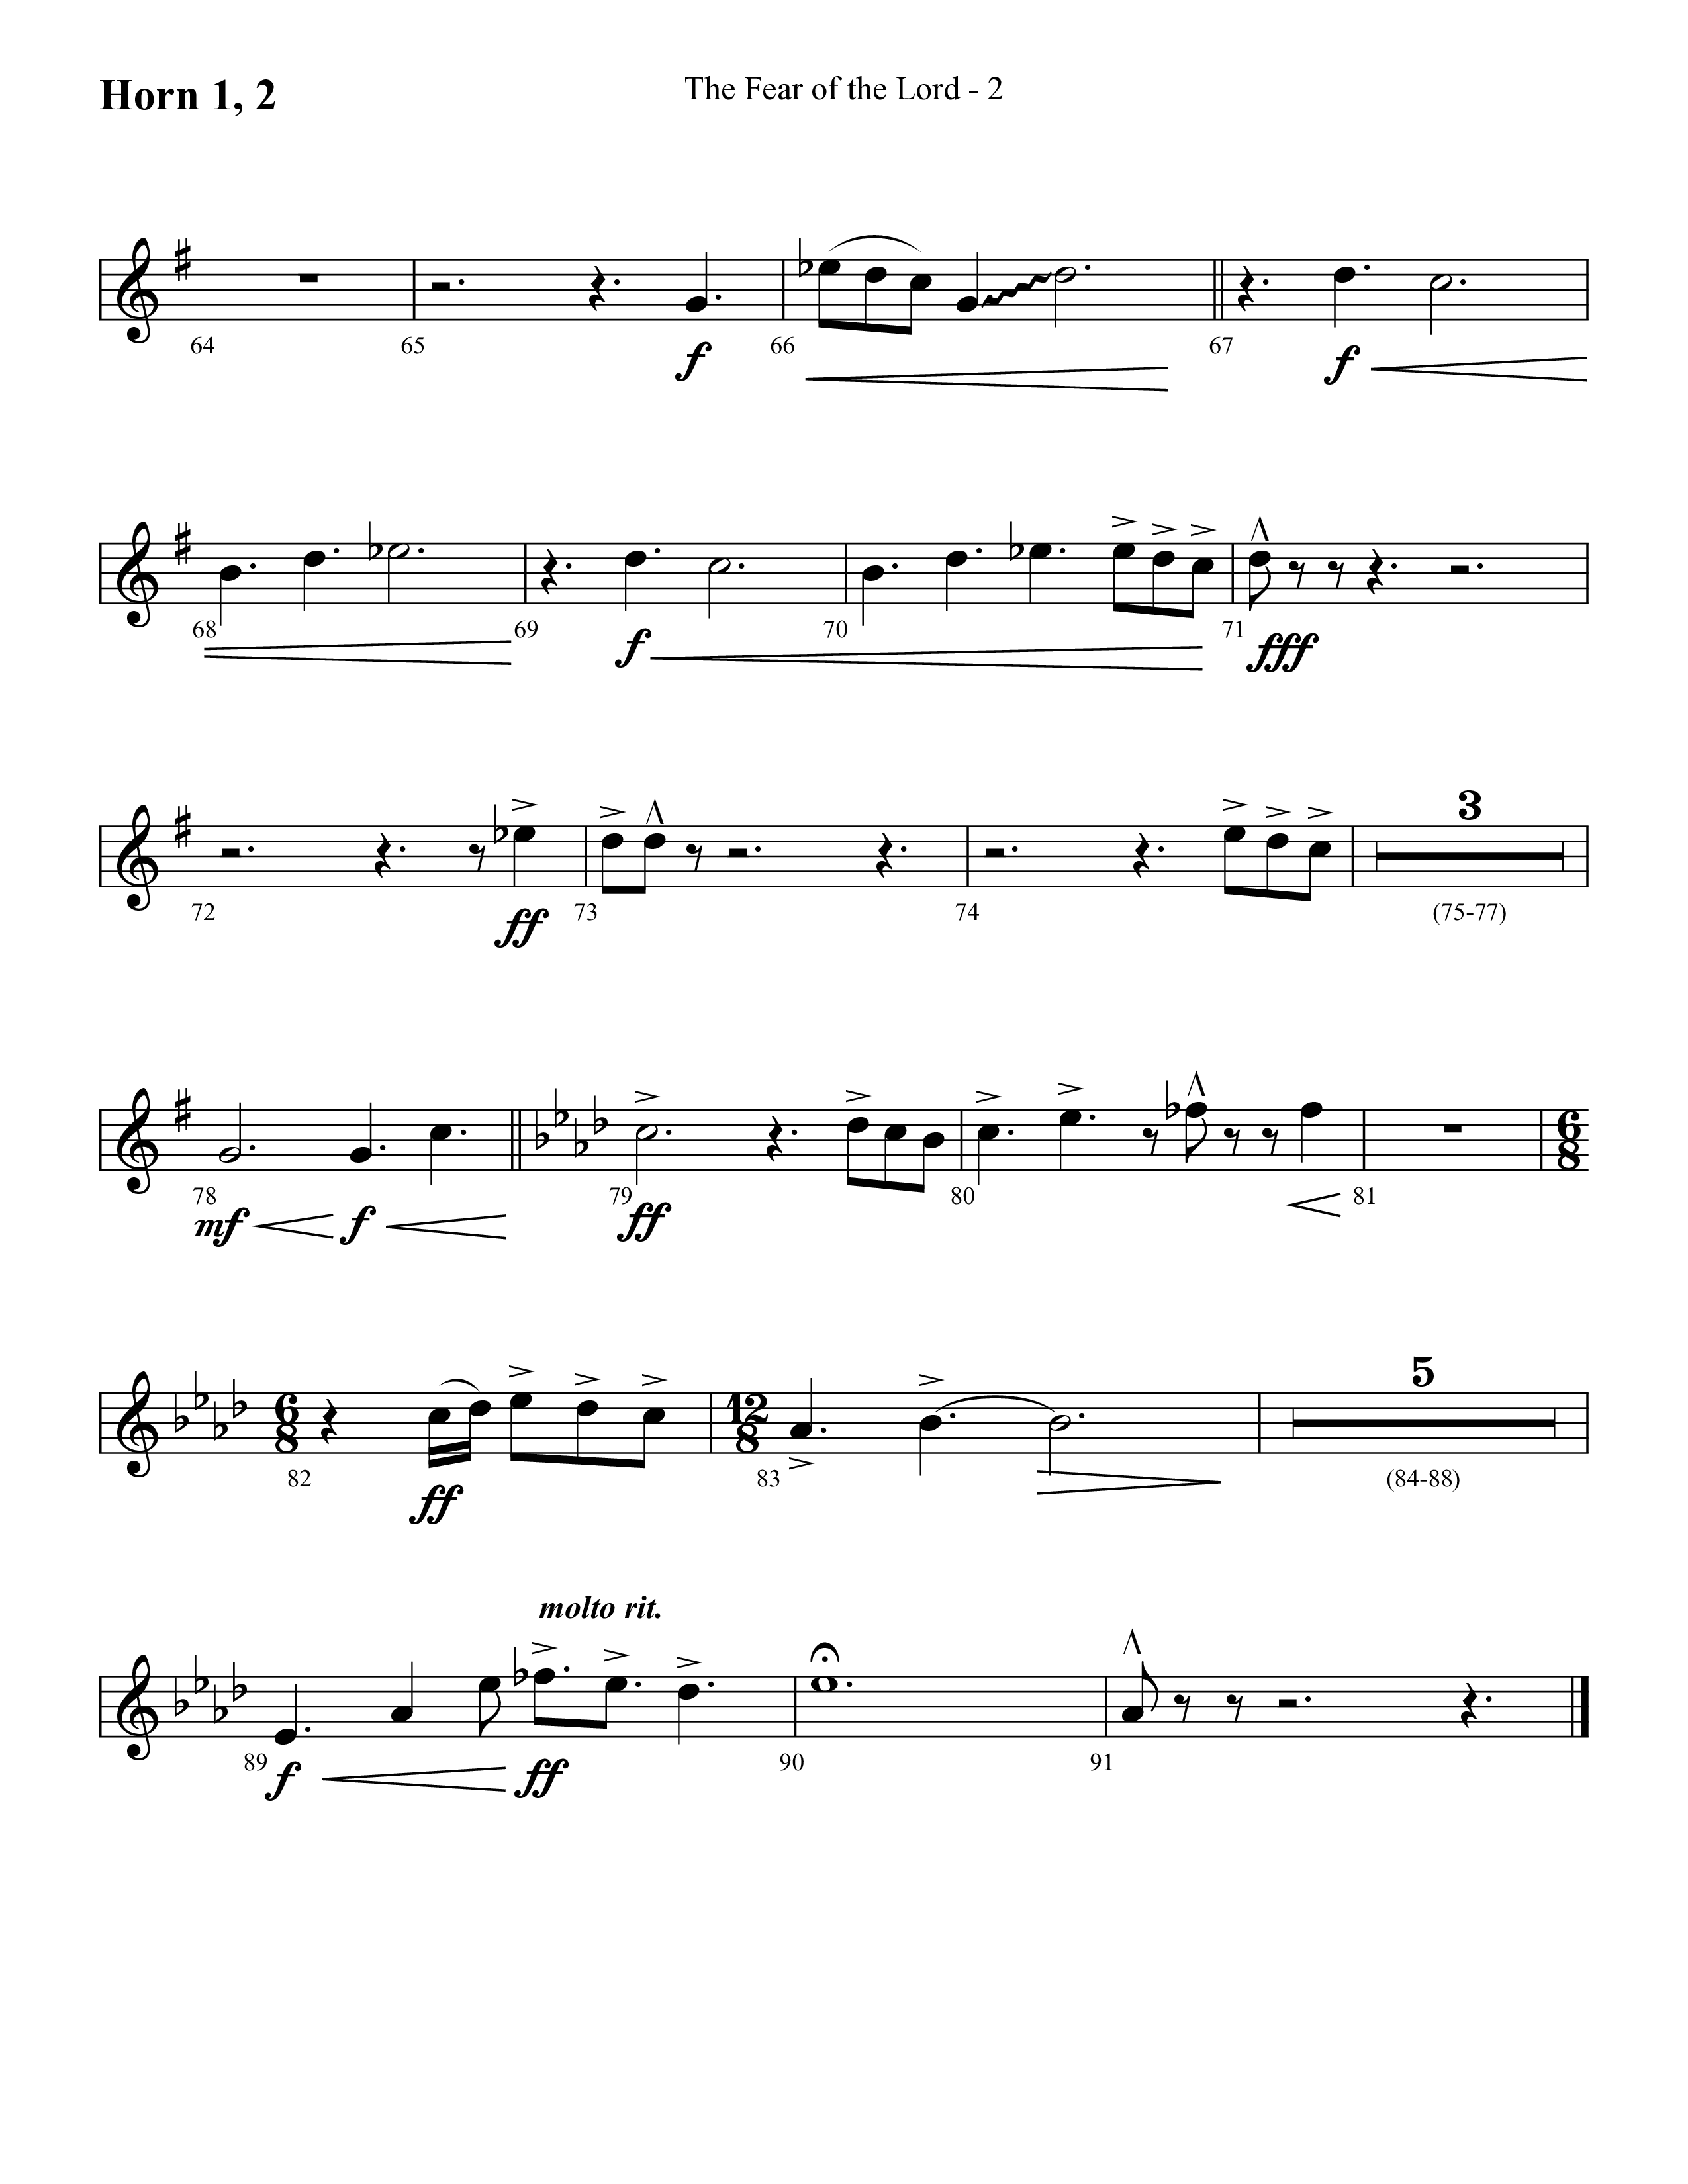 The Fear Of The Lord (Choral Anthem SATB) French Horn 1/2 (Lifeway Choral / Arr. Cliff Duren)